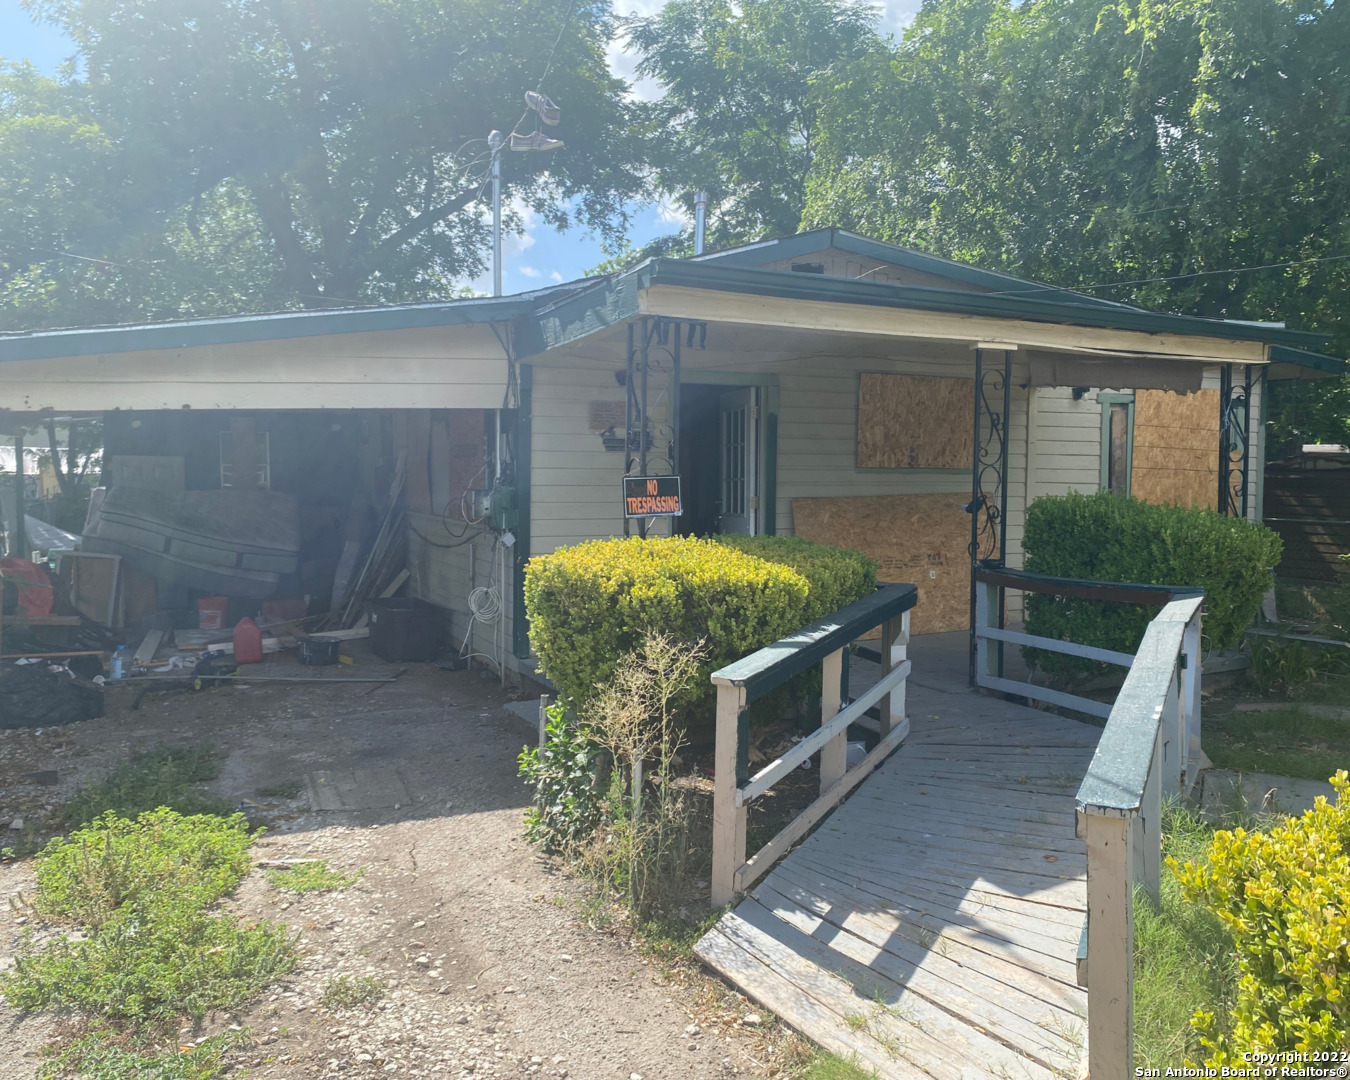 Fixer Upper!! Instant Equity! Investor and handyman special. AS-IS Sale. This 1488 sqft home has plenty of space, and the 3 bathrooms are a plus! Needs work and TLC.  Located West of Downtown. If you are an investor looking for Flip or rental investment opportunities, Call Now!